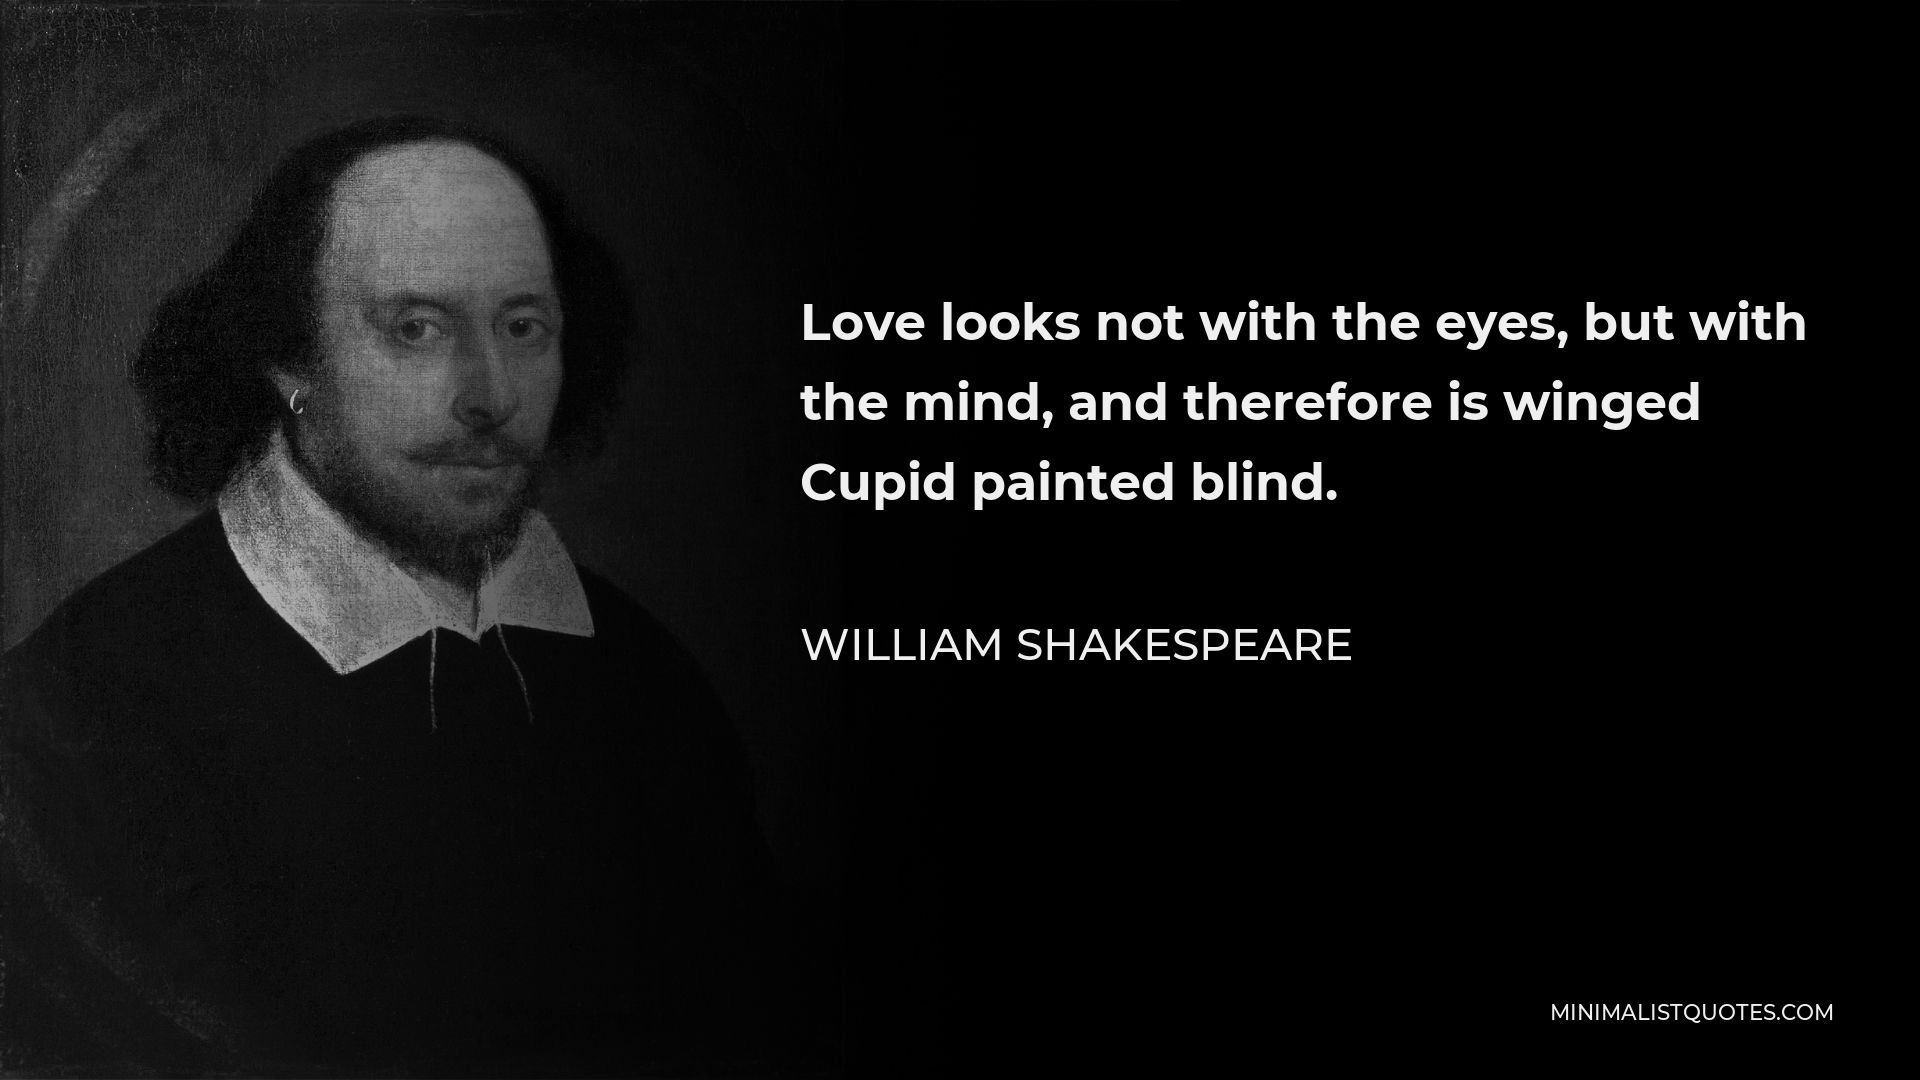 William Shakespeare Quote - Love looks not with the eyes, but with the mind, and therefore is winged Cupid painted blind.